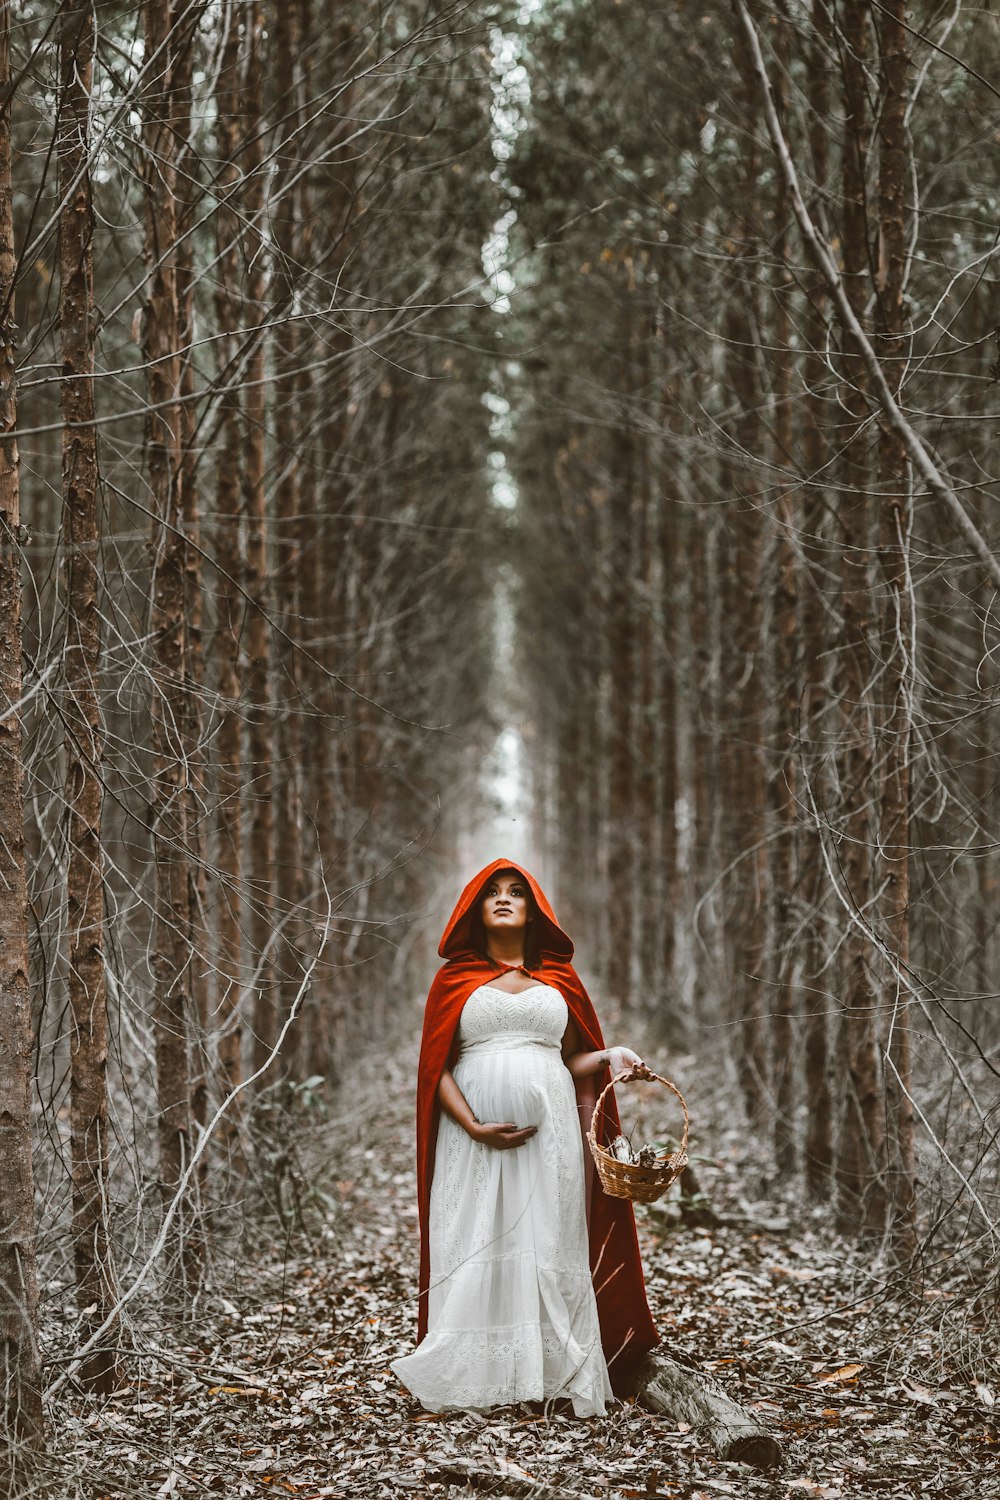 Little Red Riding Hood Pictures | Download Free Images on Unsplash